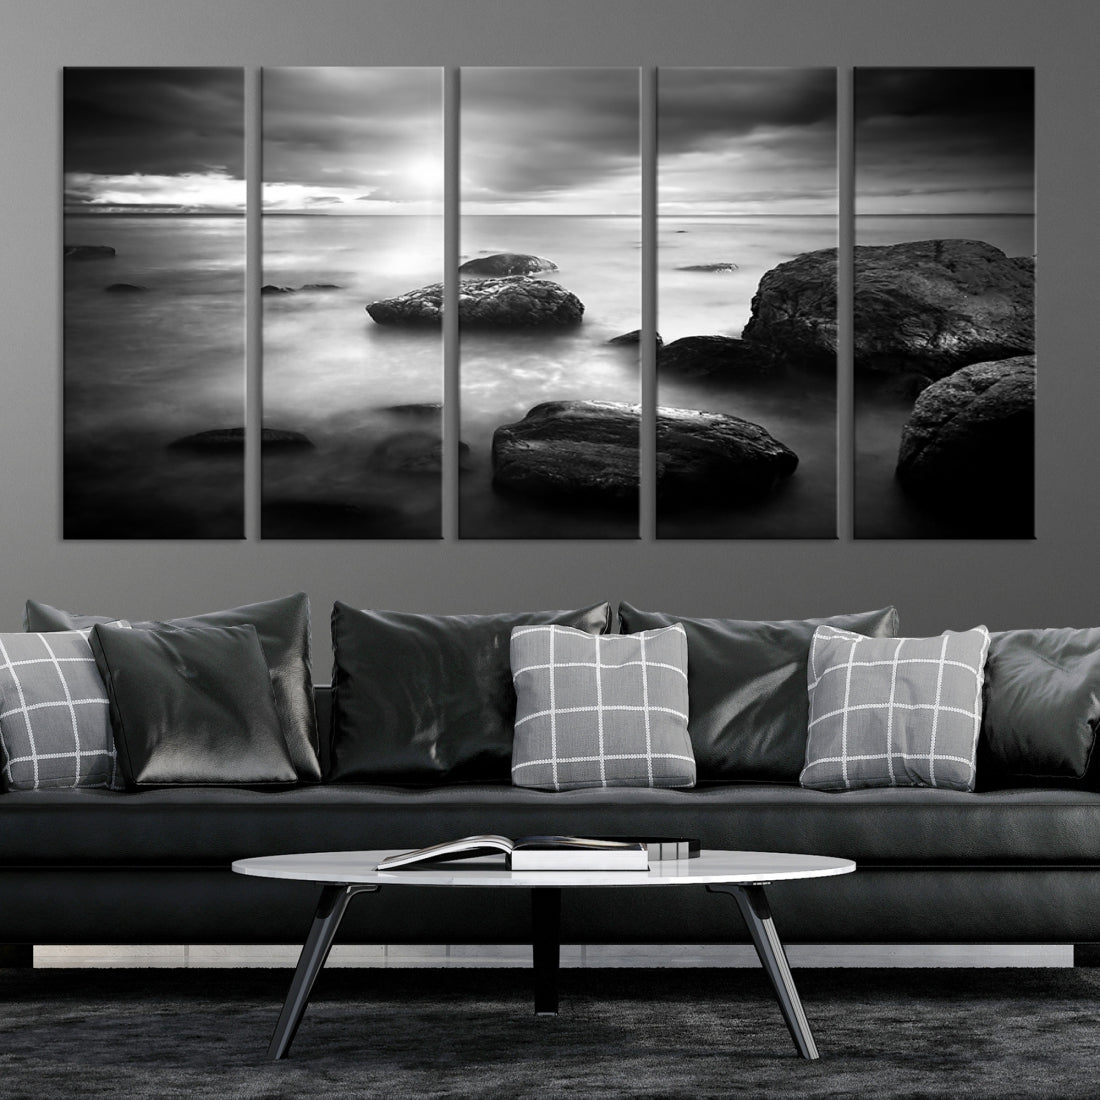 Black and White Rocks on Shore Canvas Print